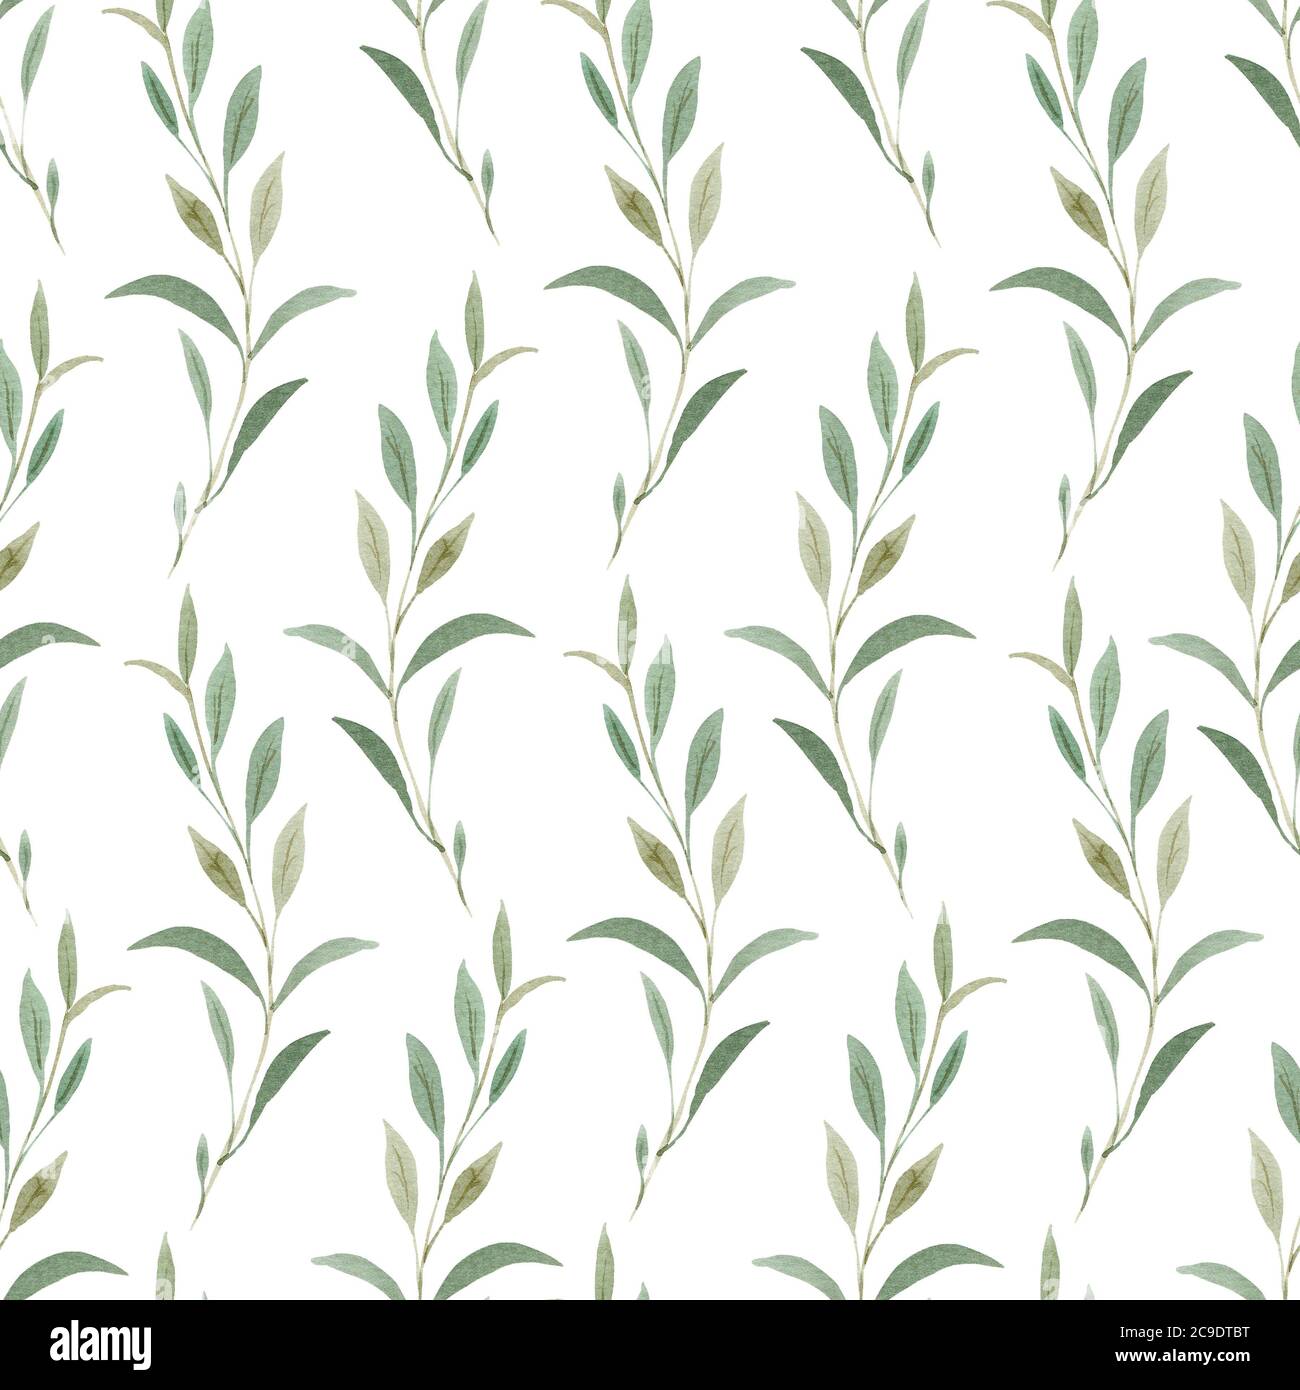 Watercolor Greenery Pattern Digital Paper Green  PNG Clipart Green Leaves Branches Clip Art Aquarelle Arrangements Bright Foliage